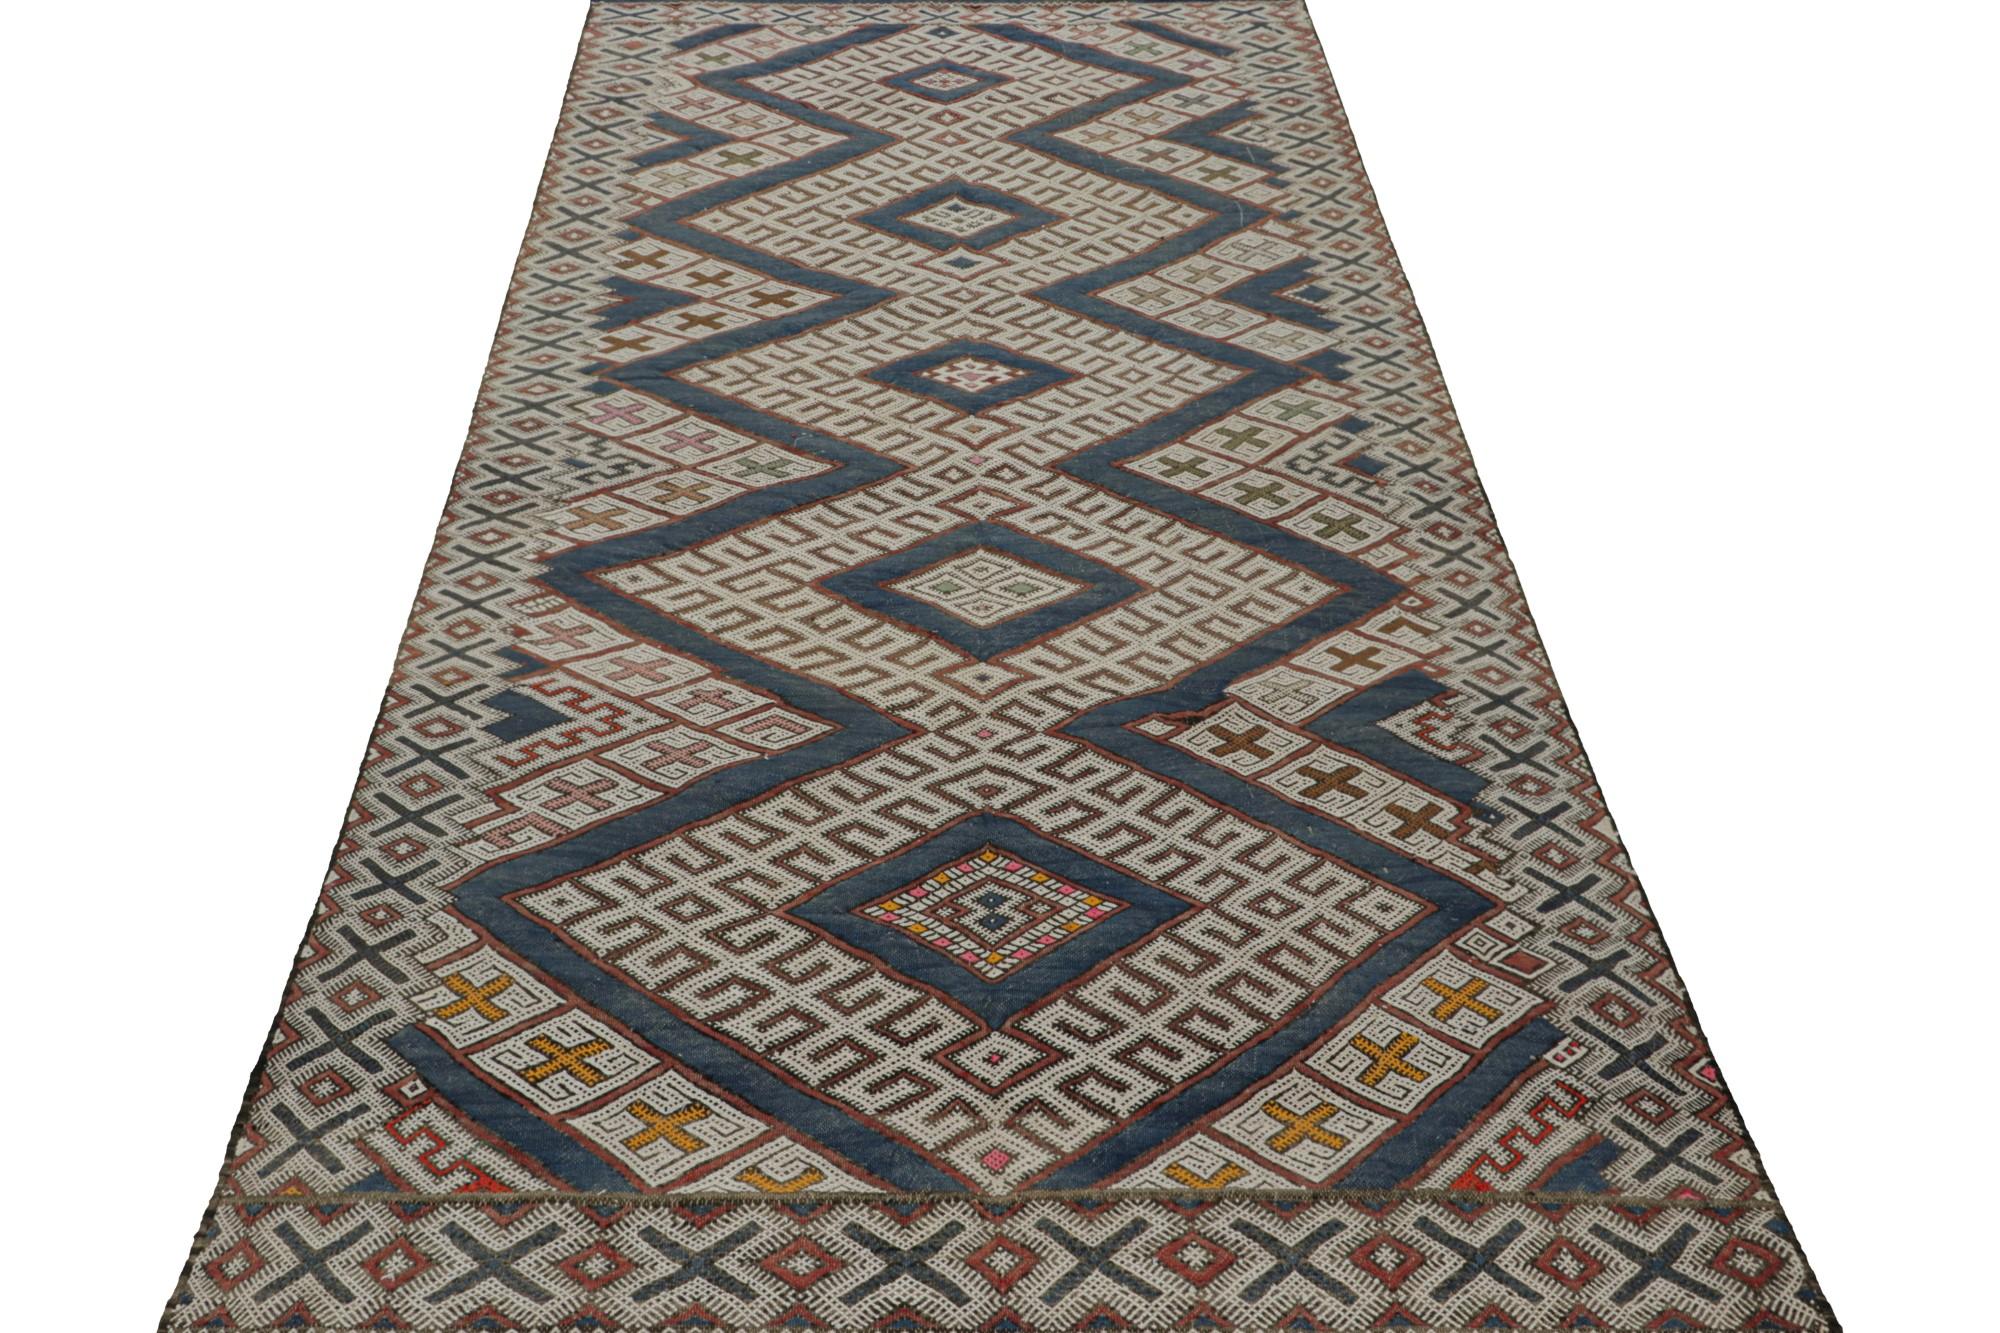 Hand-Woven Vintage Zayane Moroccan Kilim Rug, with Geometric Patterns, from Rug & Kilim For Sale